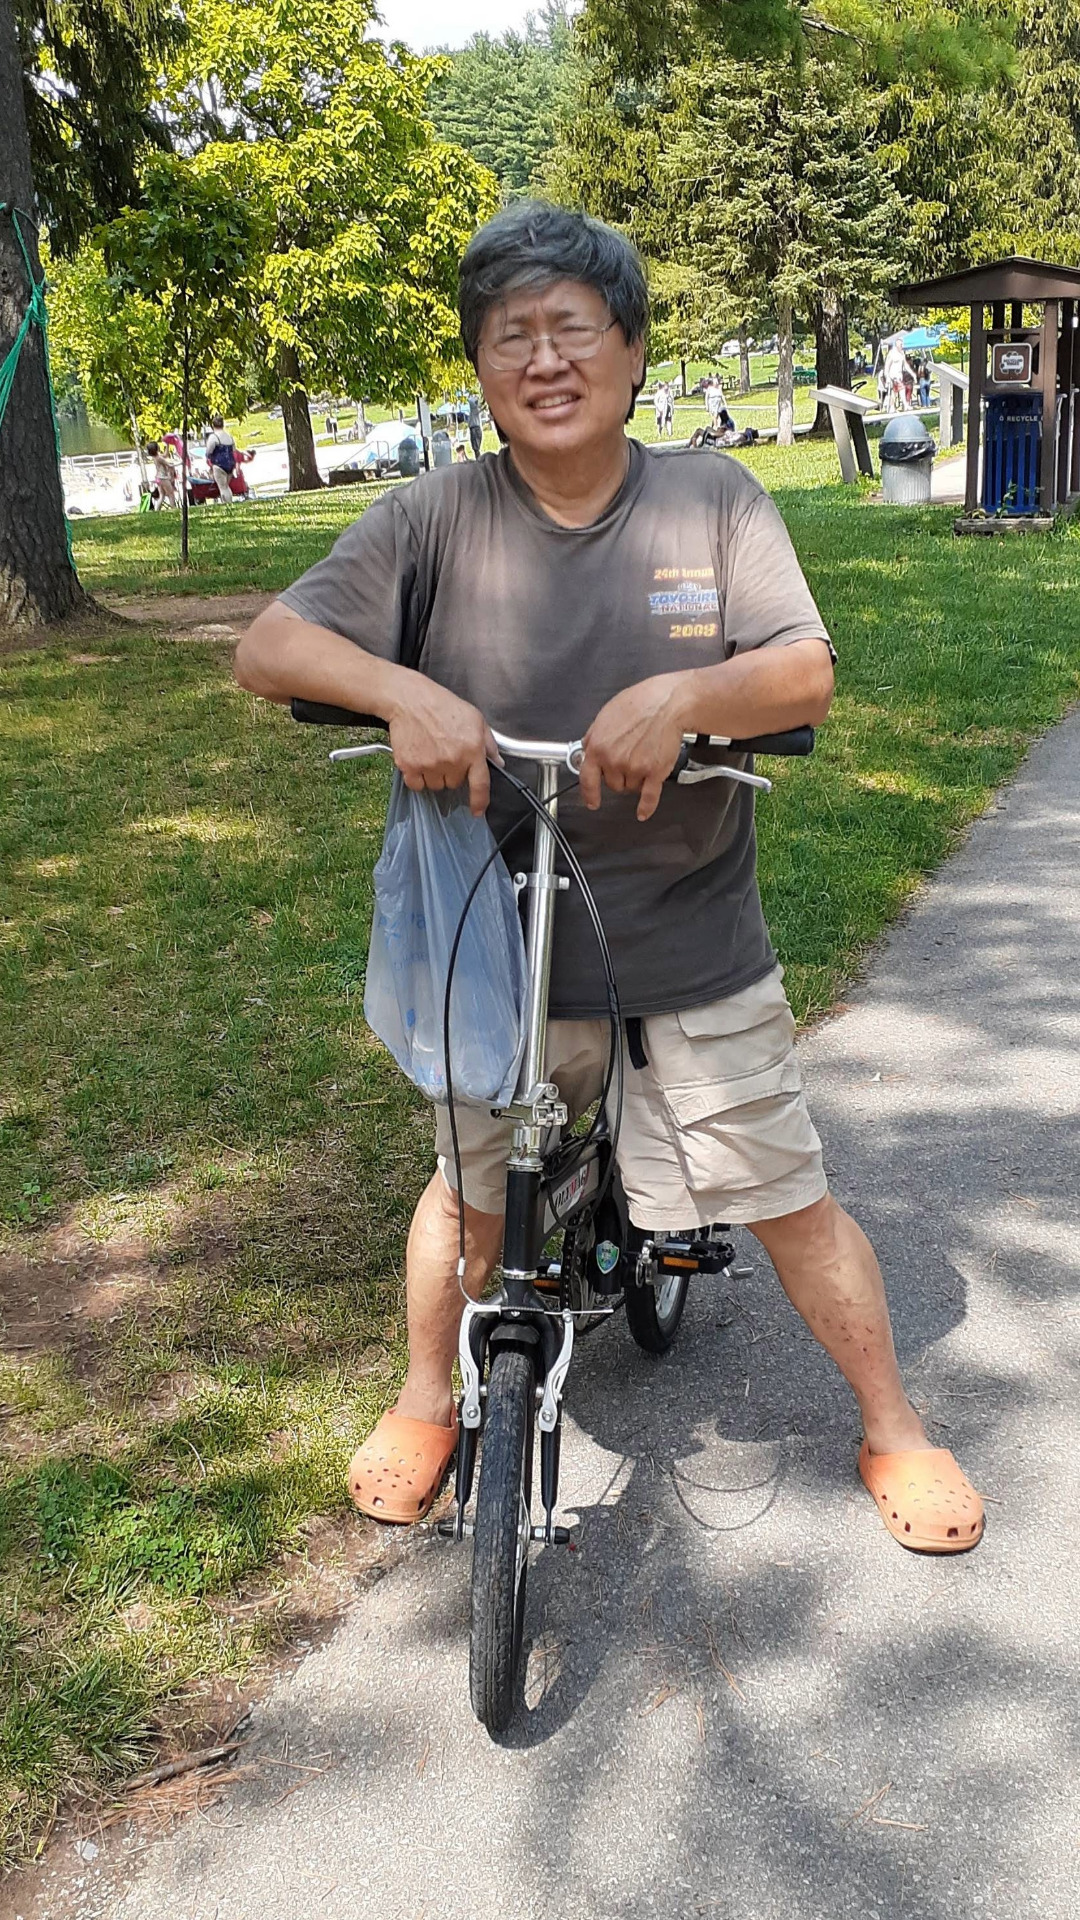 George Hing with his folding bike stopped along a path in the park